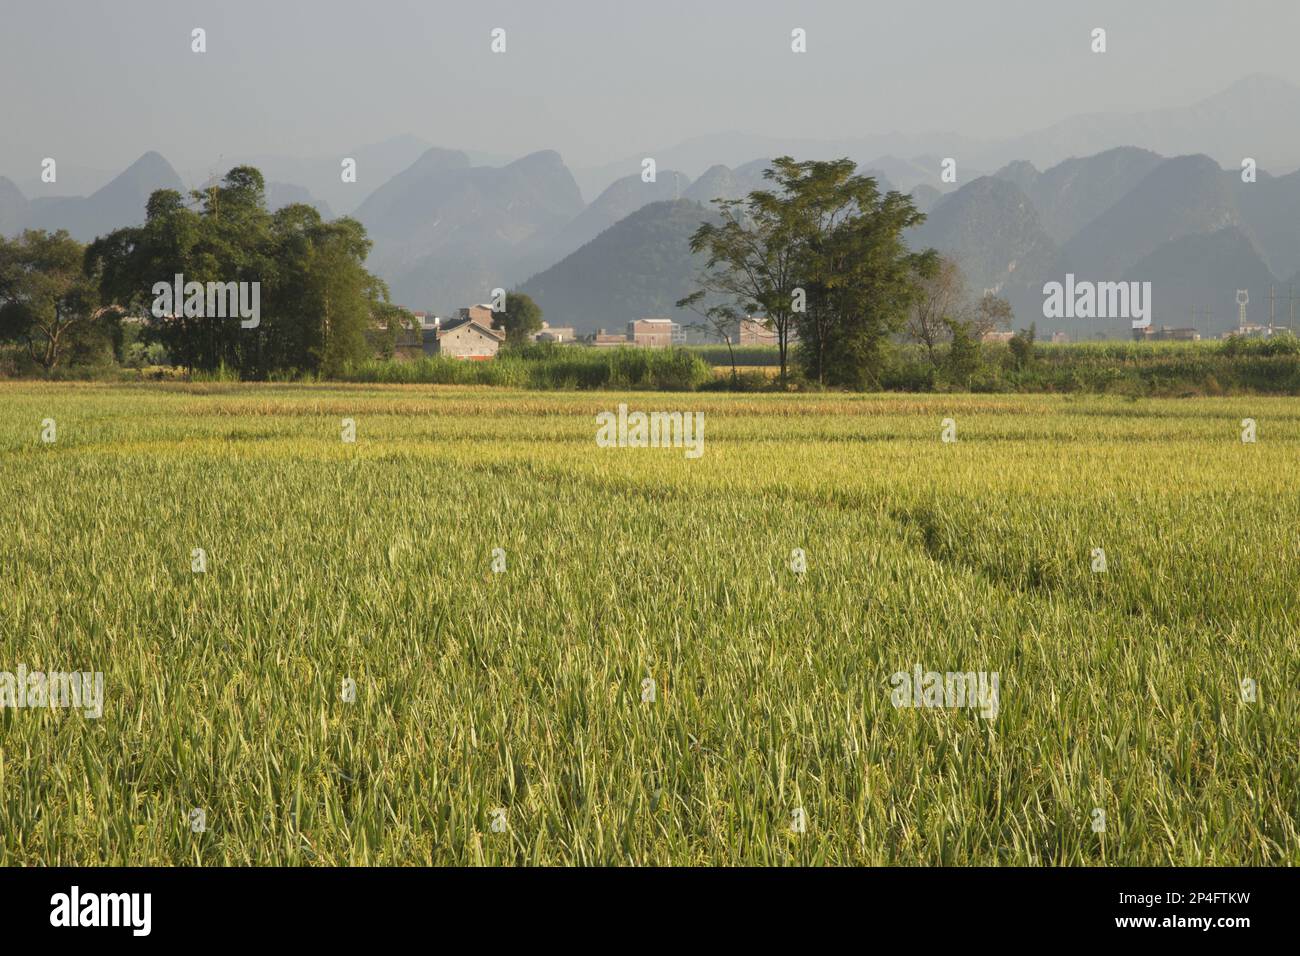 Asian rice (Oryza sativa) growing in a paddy field with limestone karst formations in the background, Guilin, Guangxi Zhuang Autonomous Region, China Stock Photo